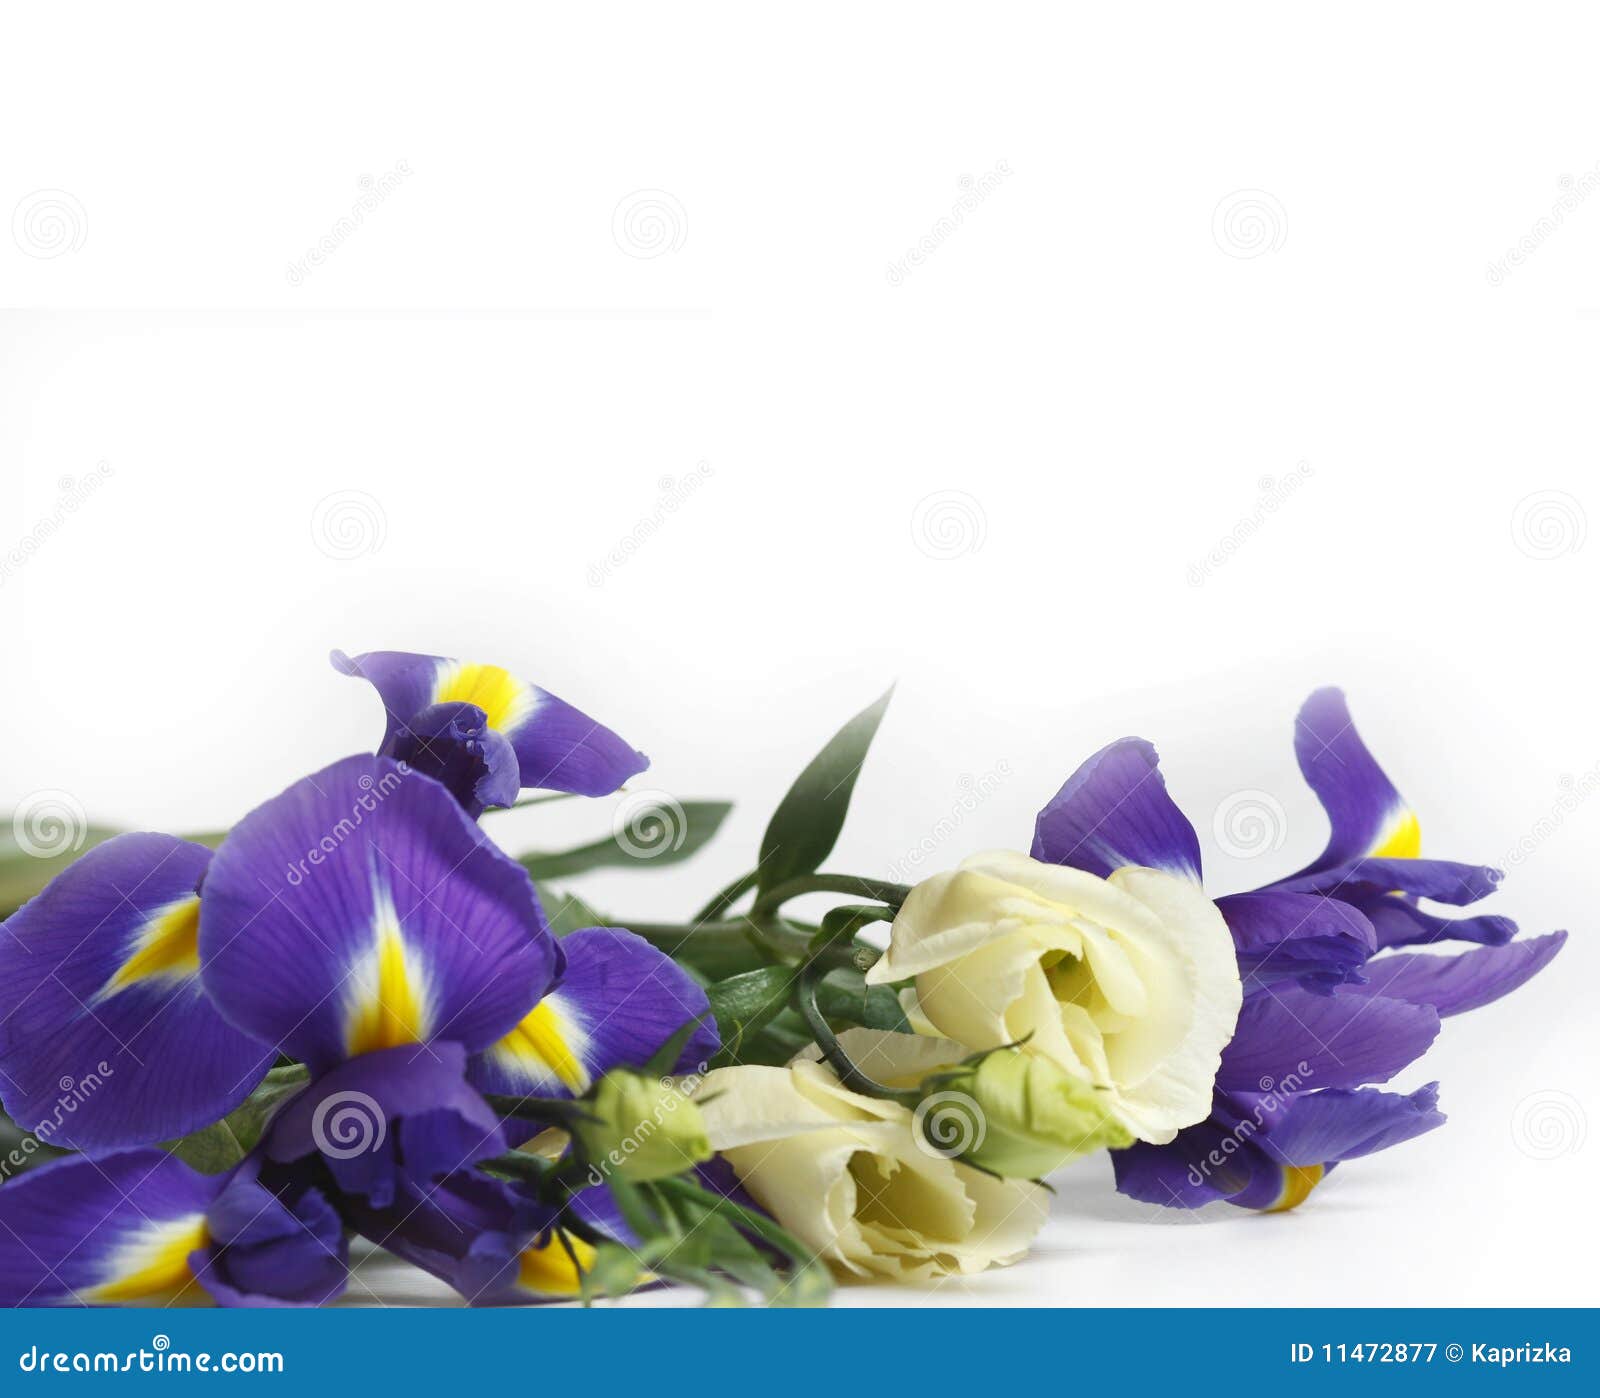 clipart delicate flowers - photo #37